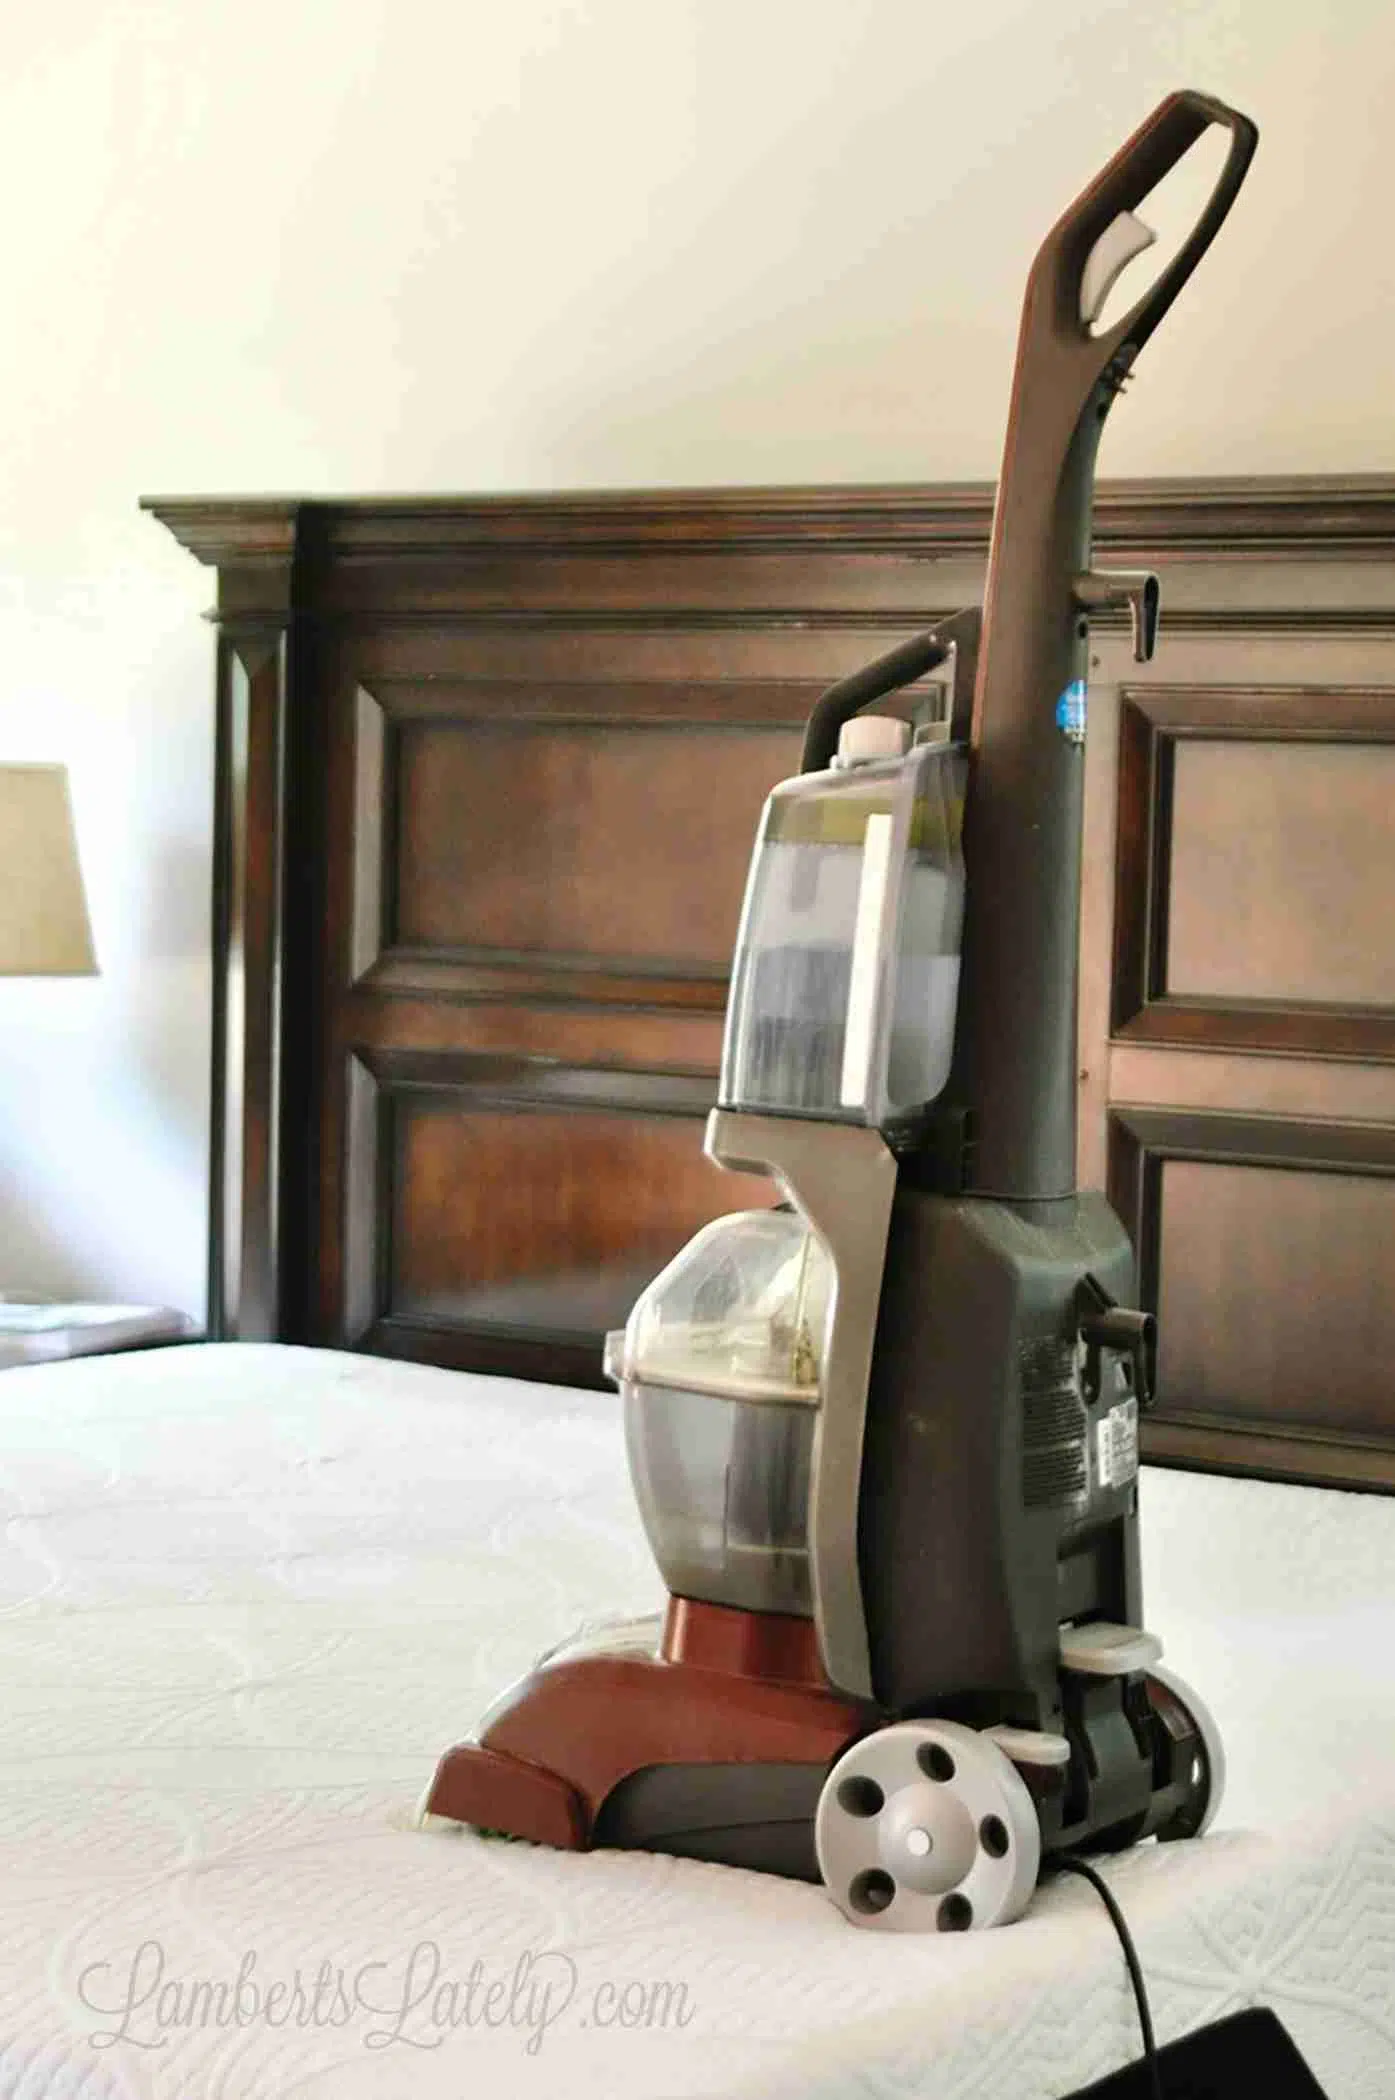 carpet cleaner on top of a mattress